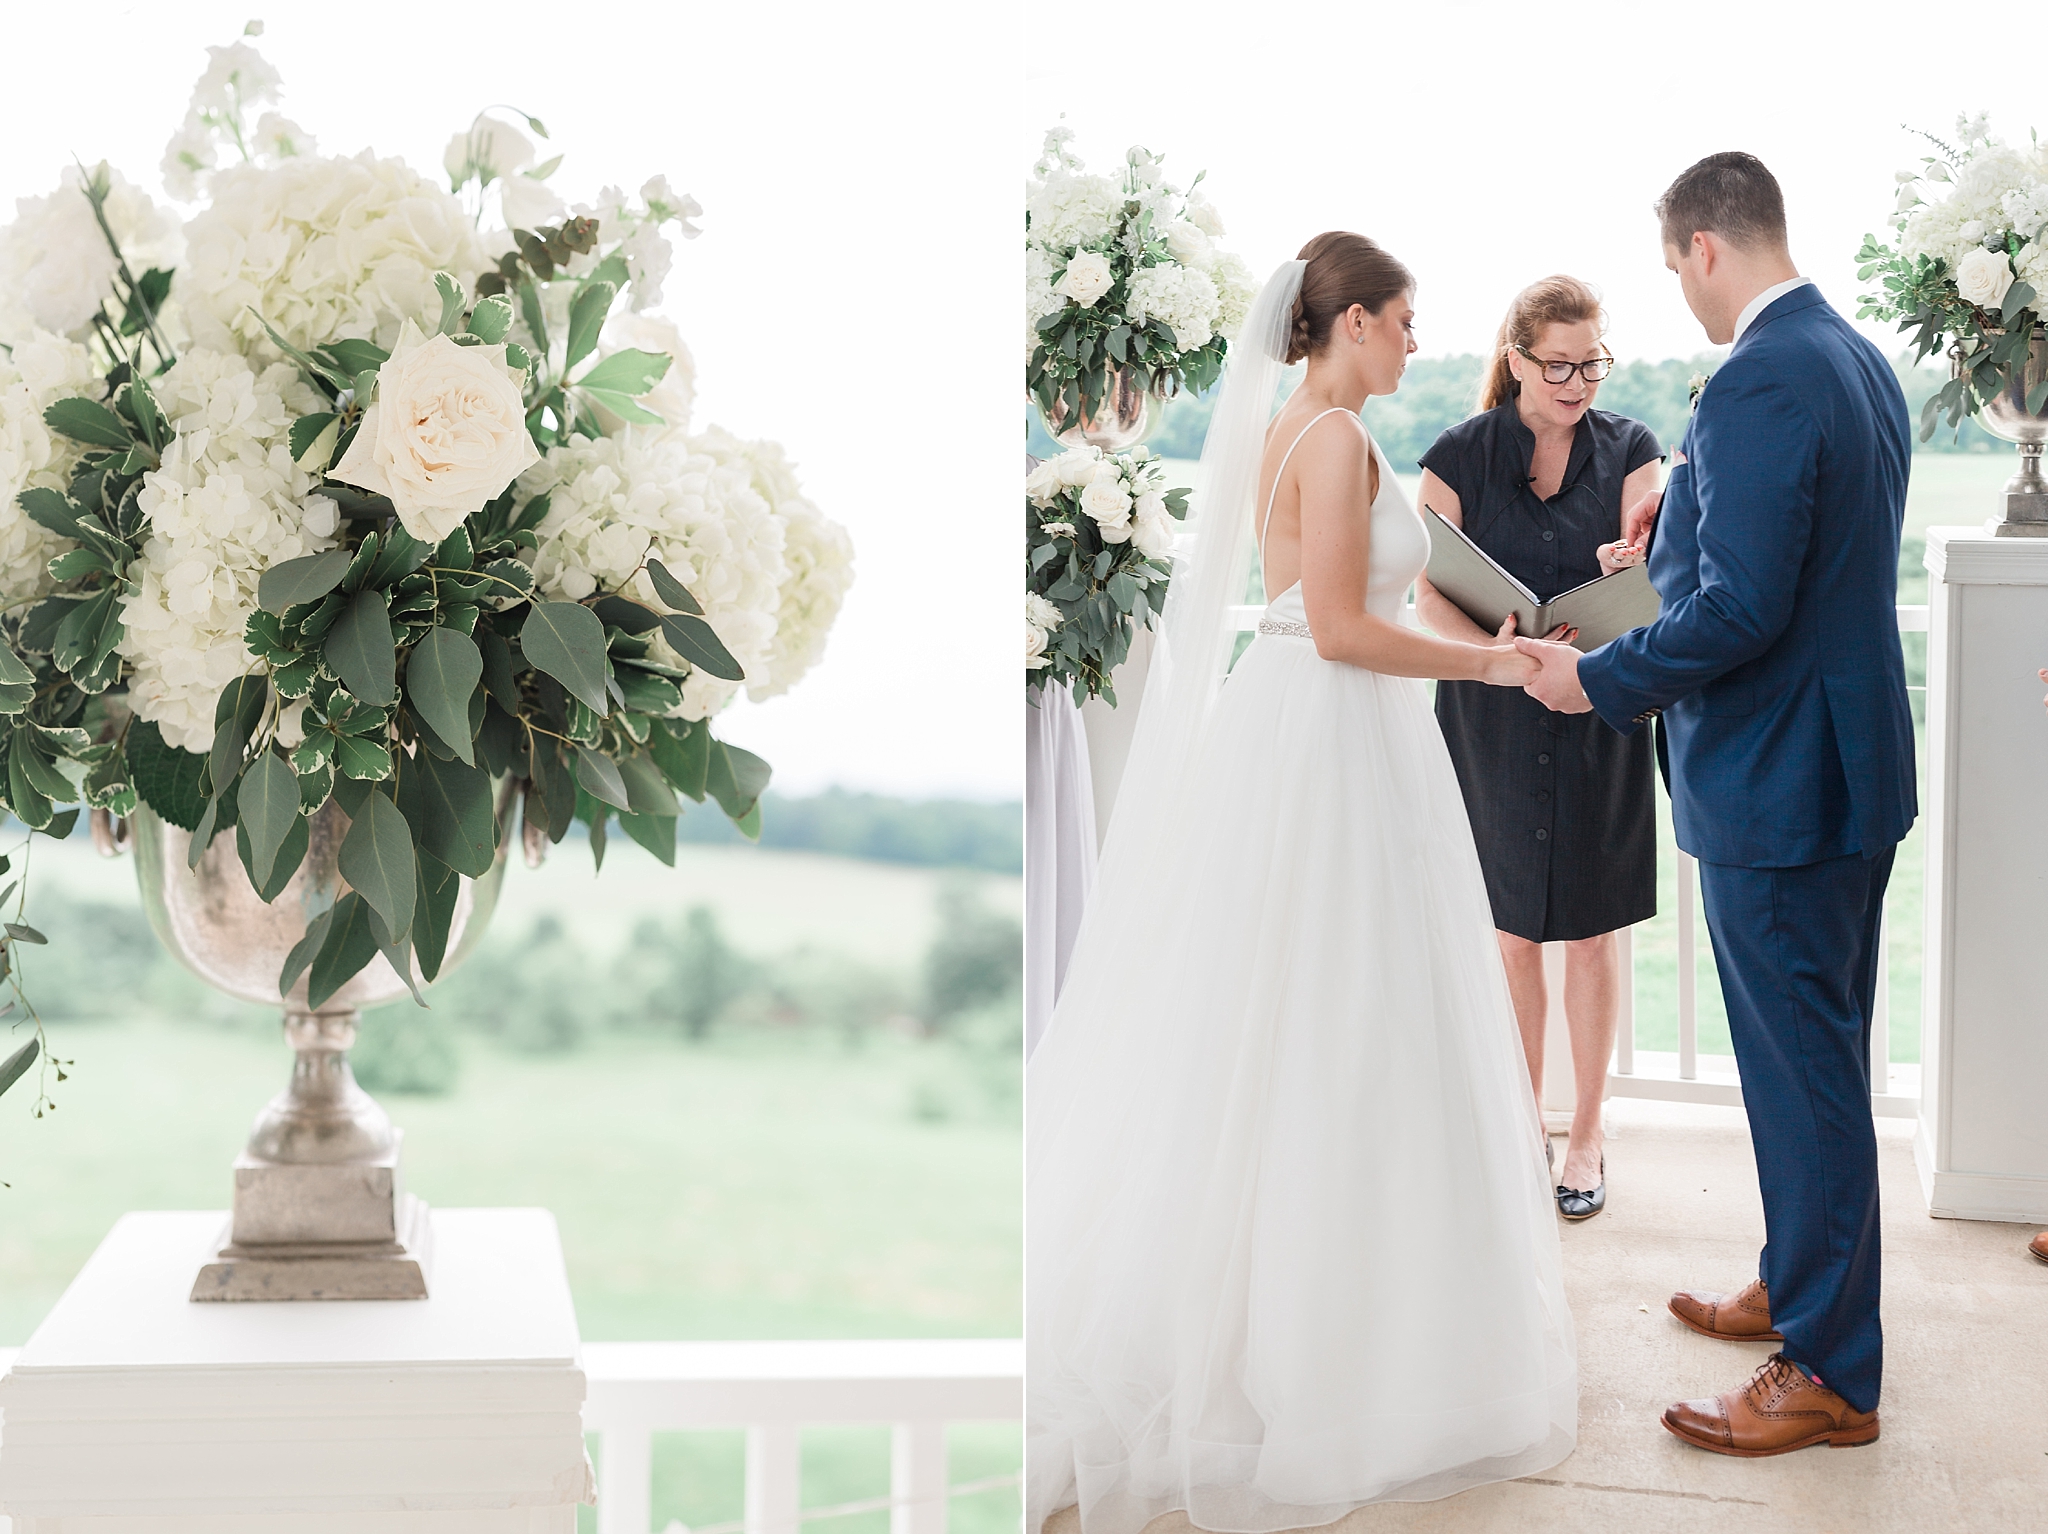 This elegant Rixey Manor wedding featured a soft color palette of blues, greys, and sage and was photographed by DC photographer, Alicia Lacey.